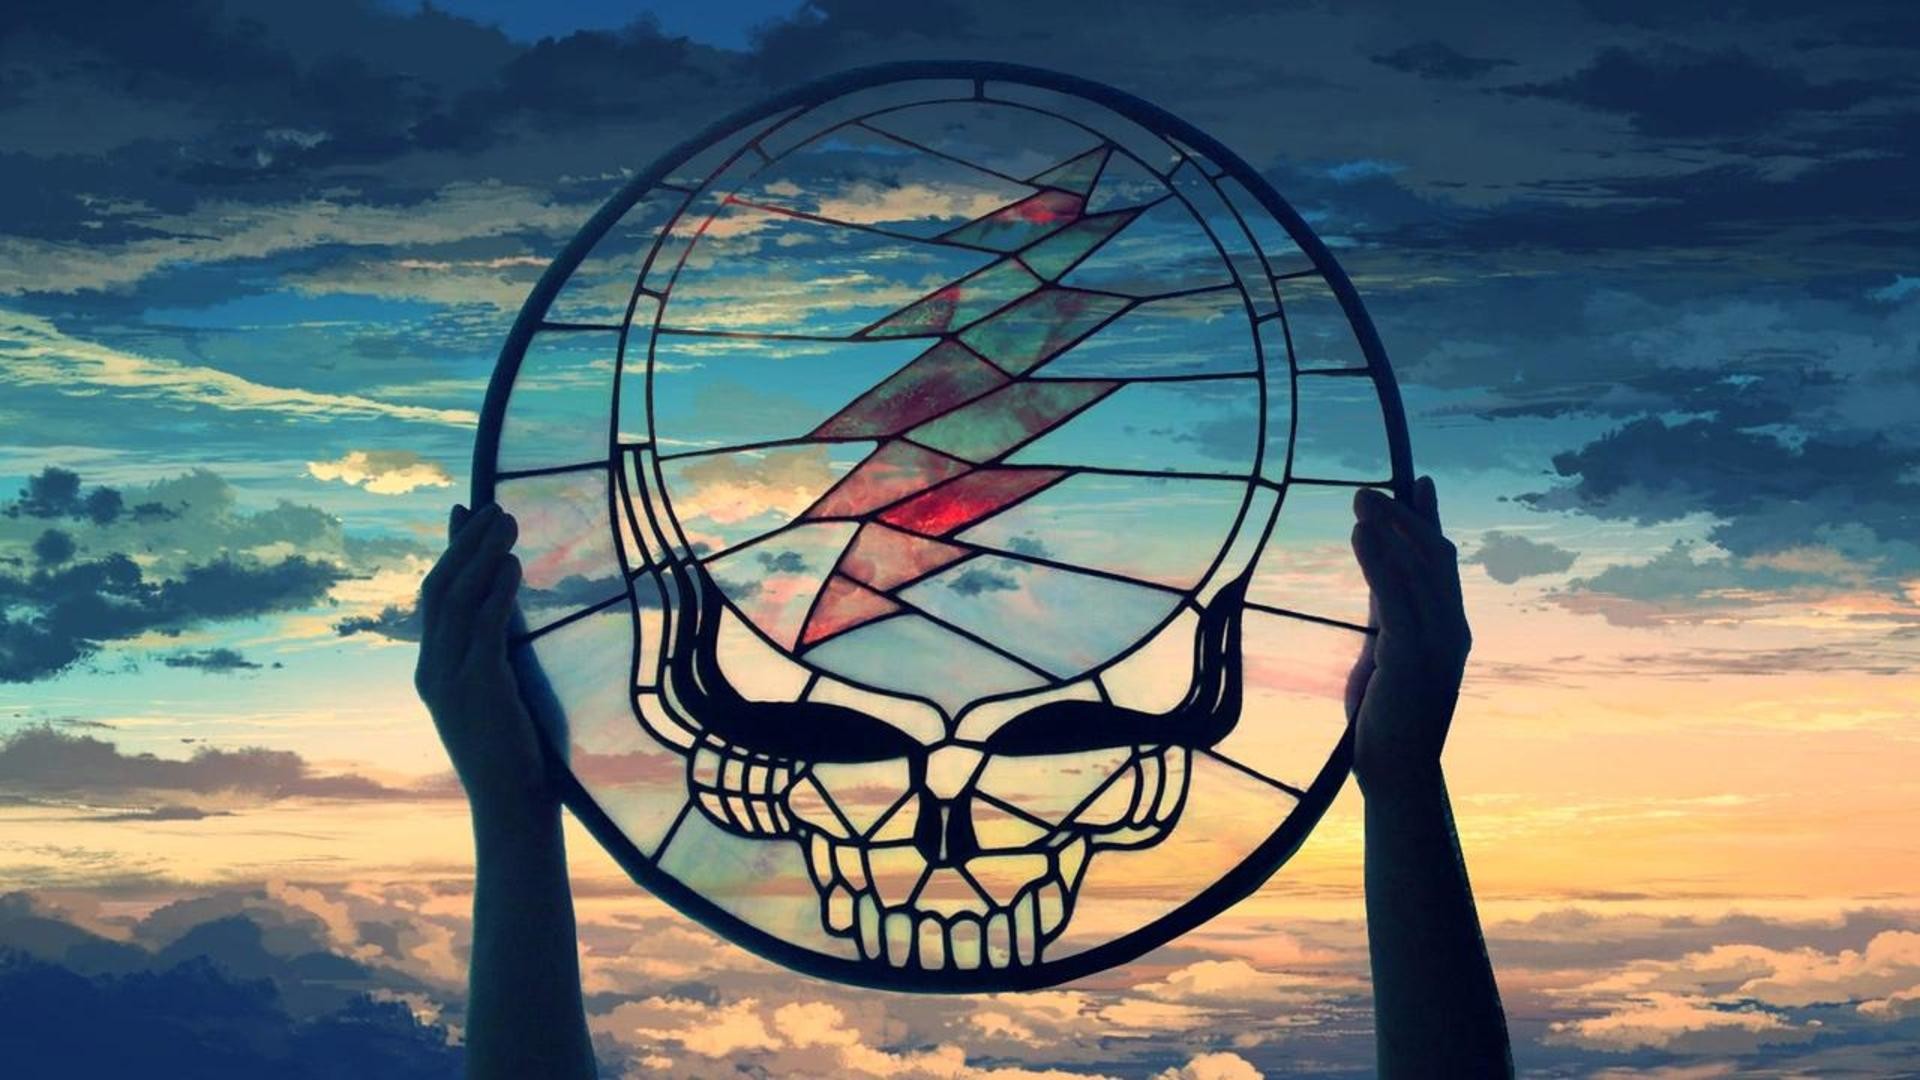 1920x1080 Best Grateful Dead Images & Wallpapers Chasity Fattorini